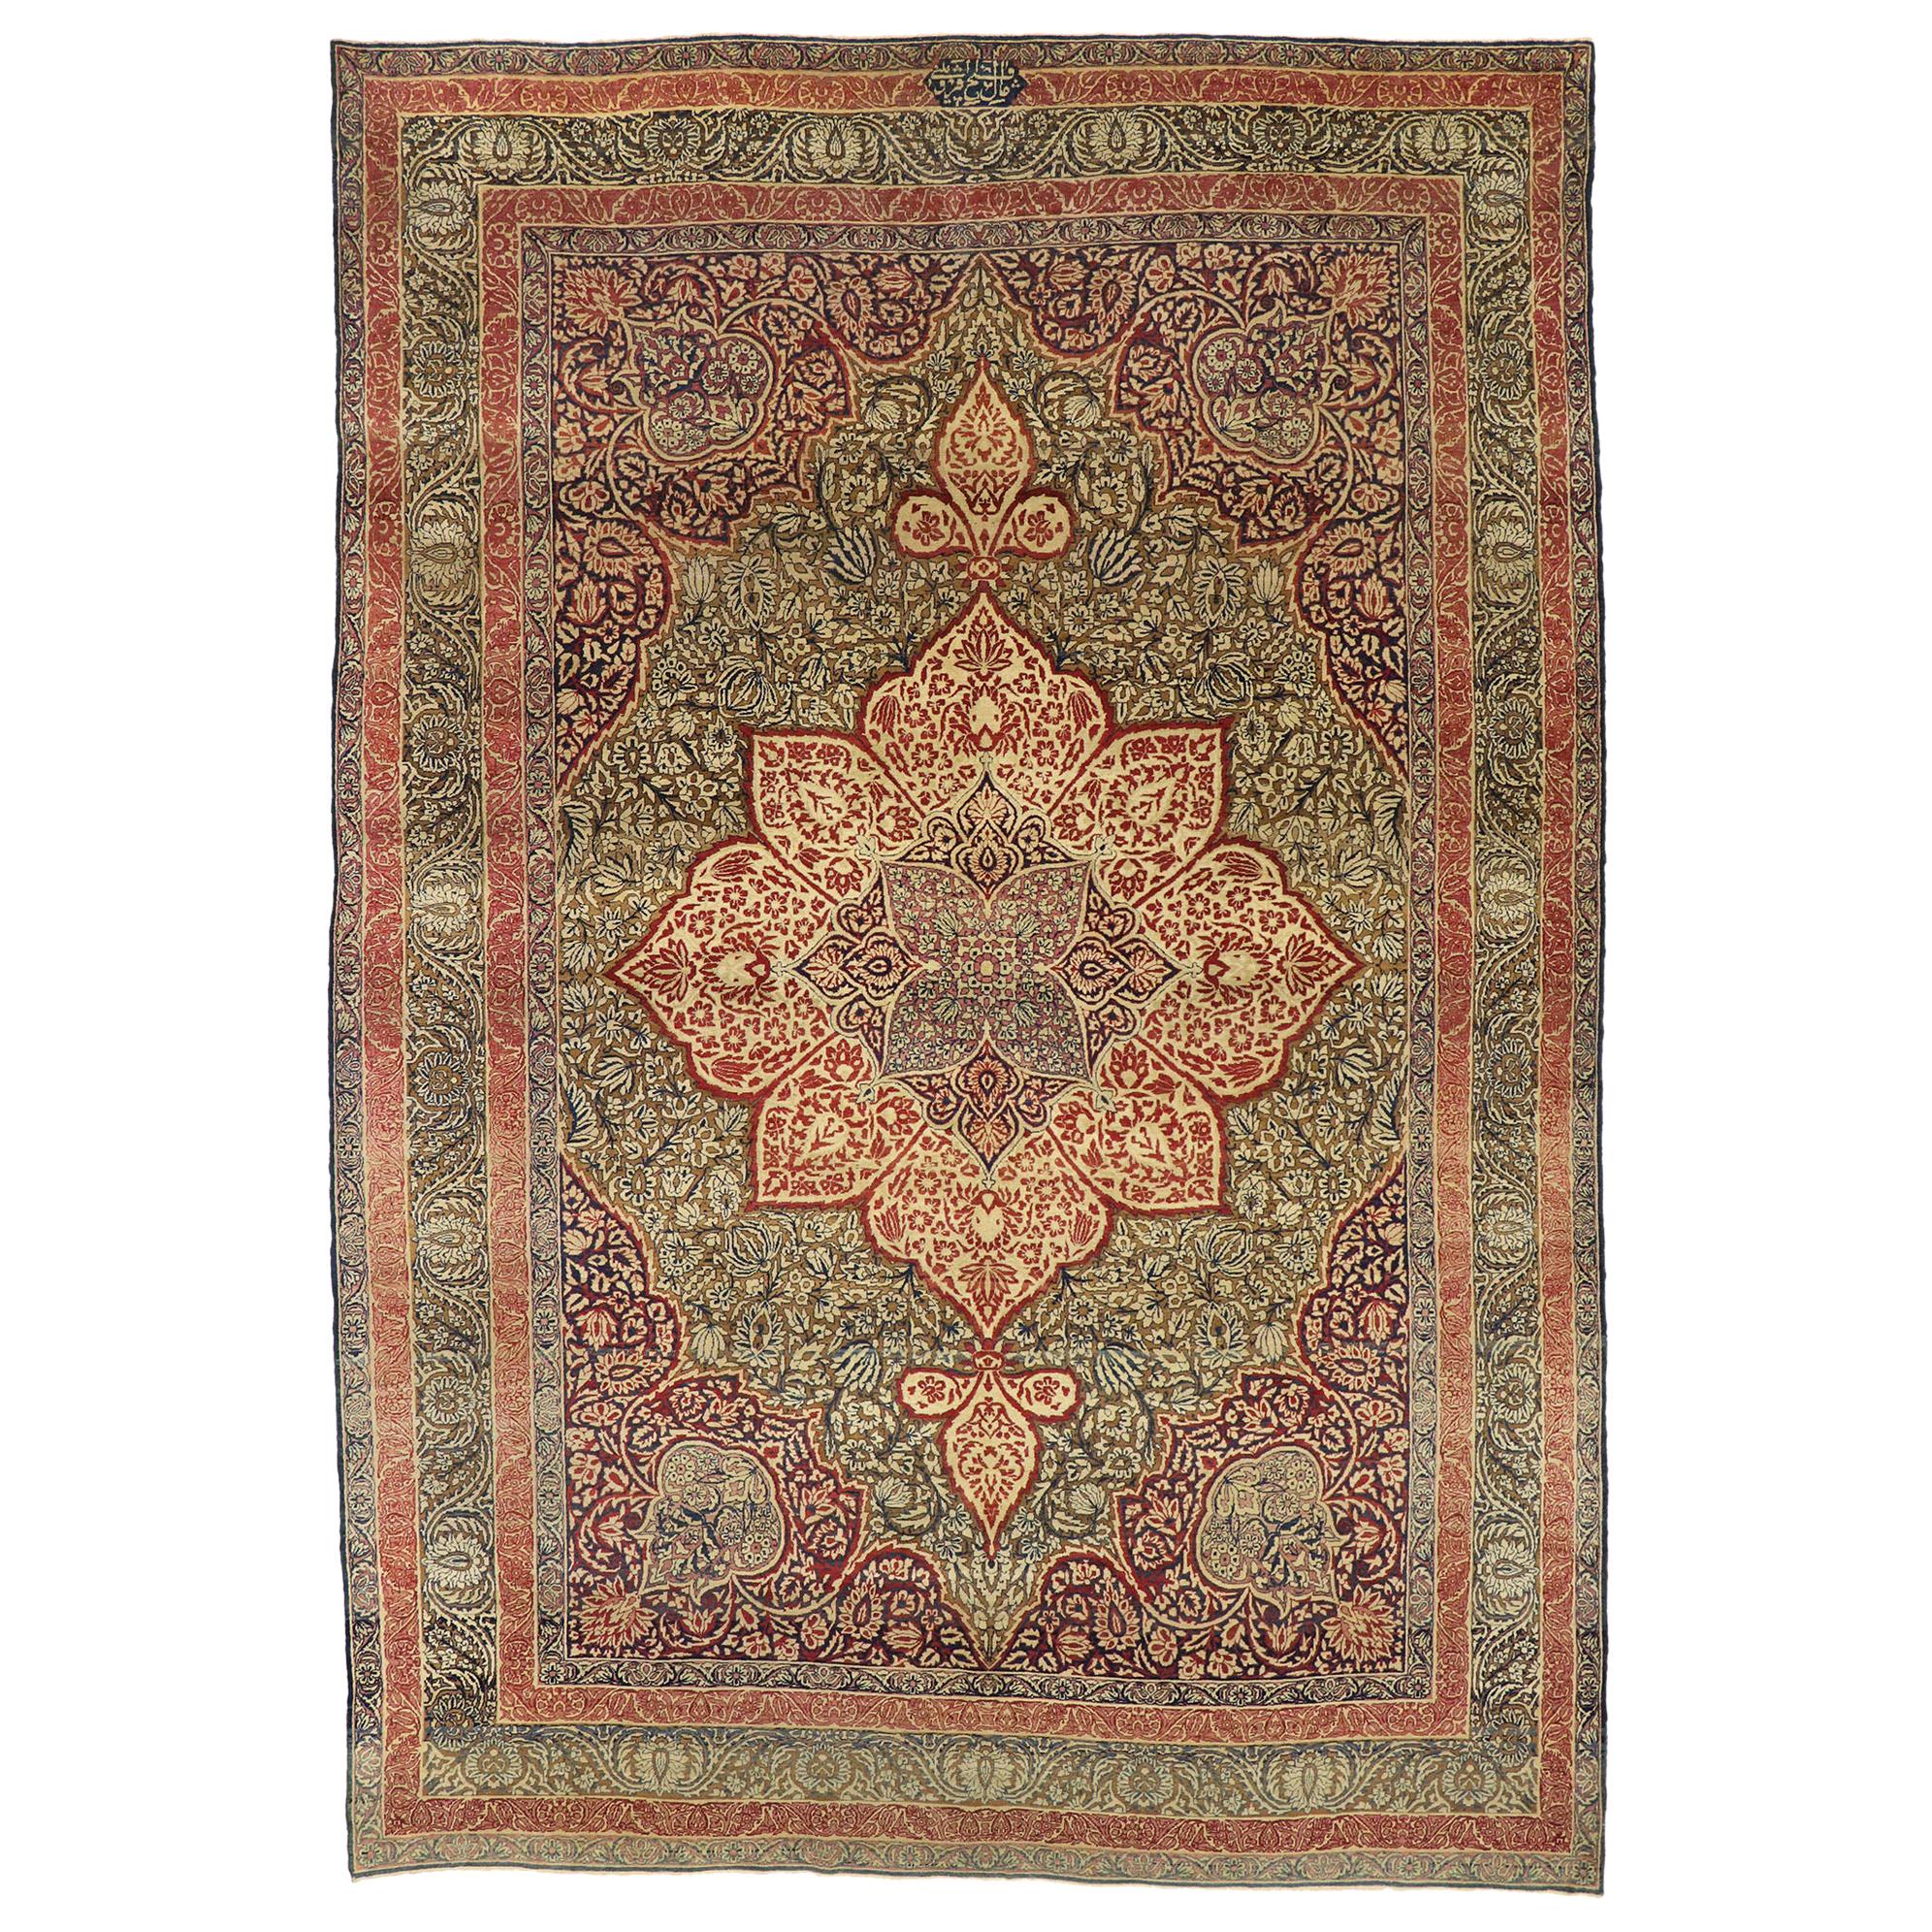 Antique Persian Kermanshah Rug with William Morris Arts & Crafts Style For Sale